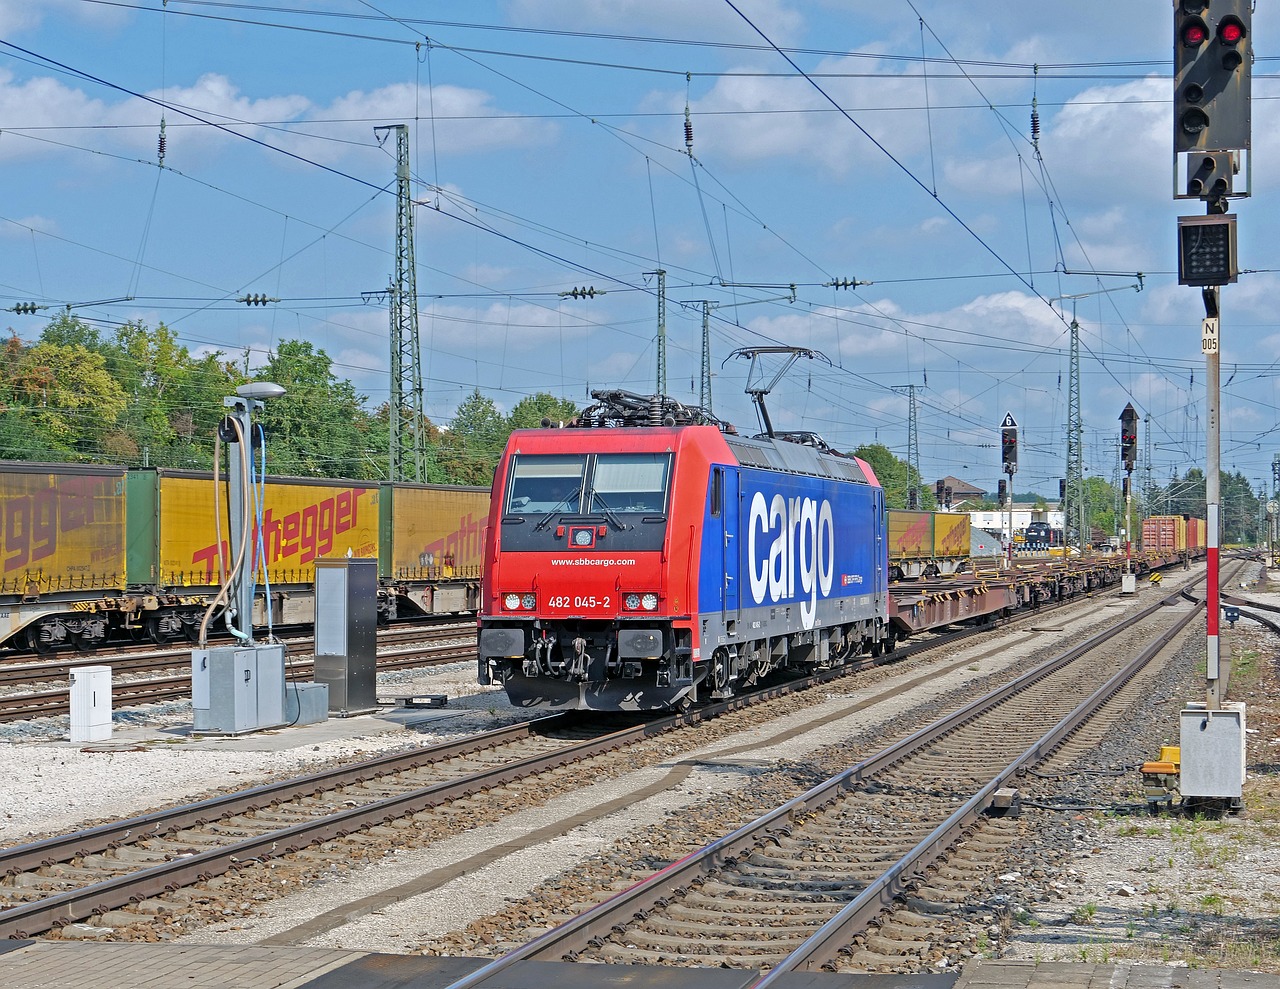 container_train_3657997_1280.jpg